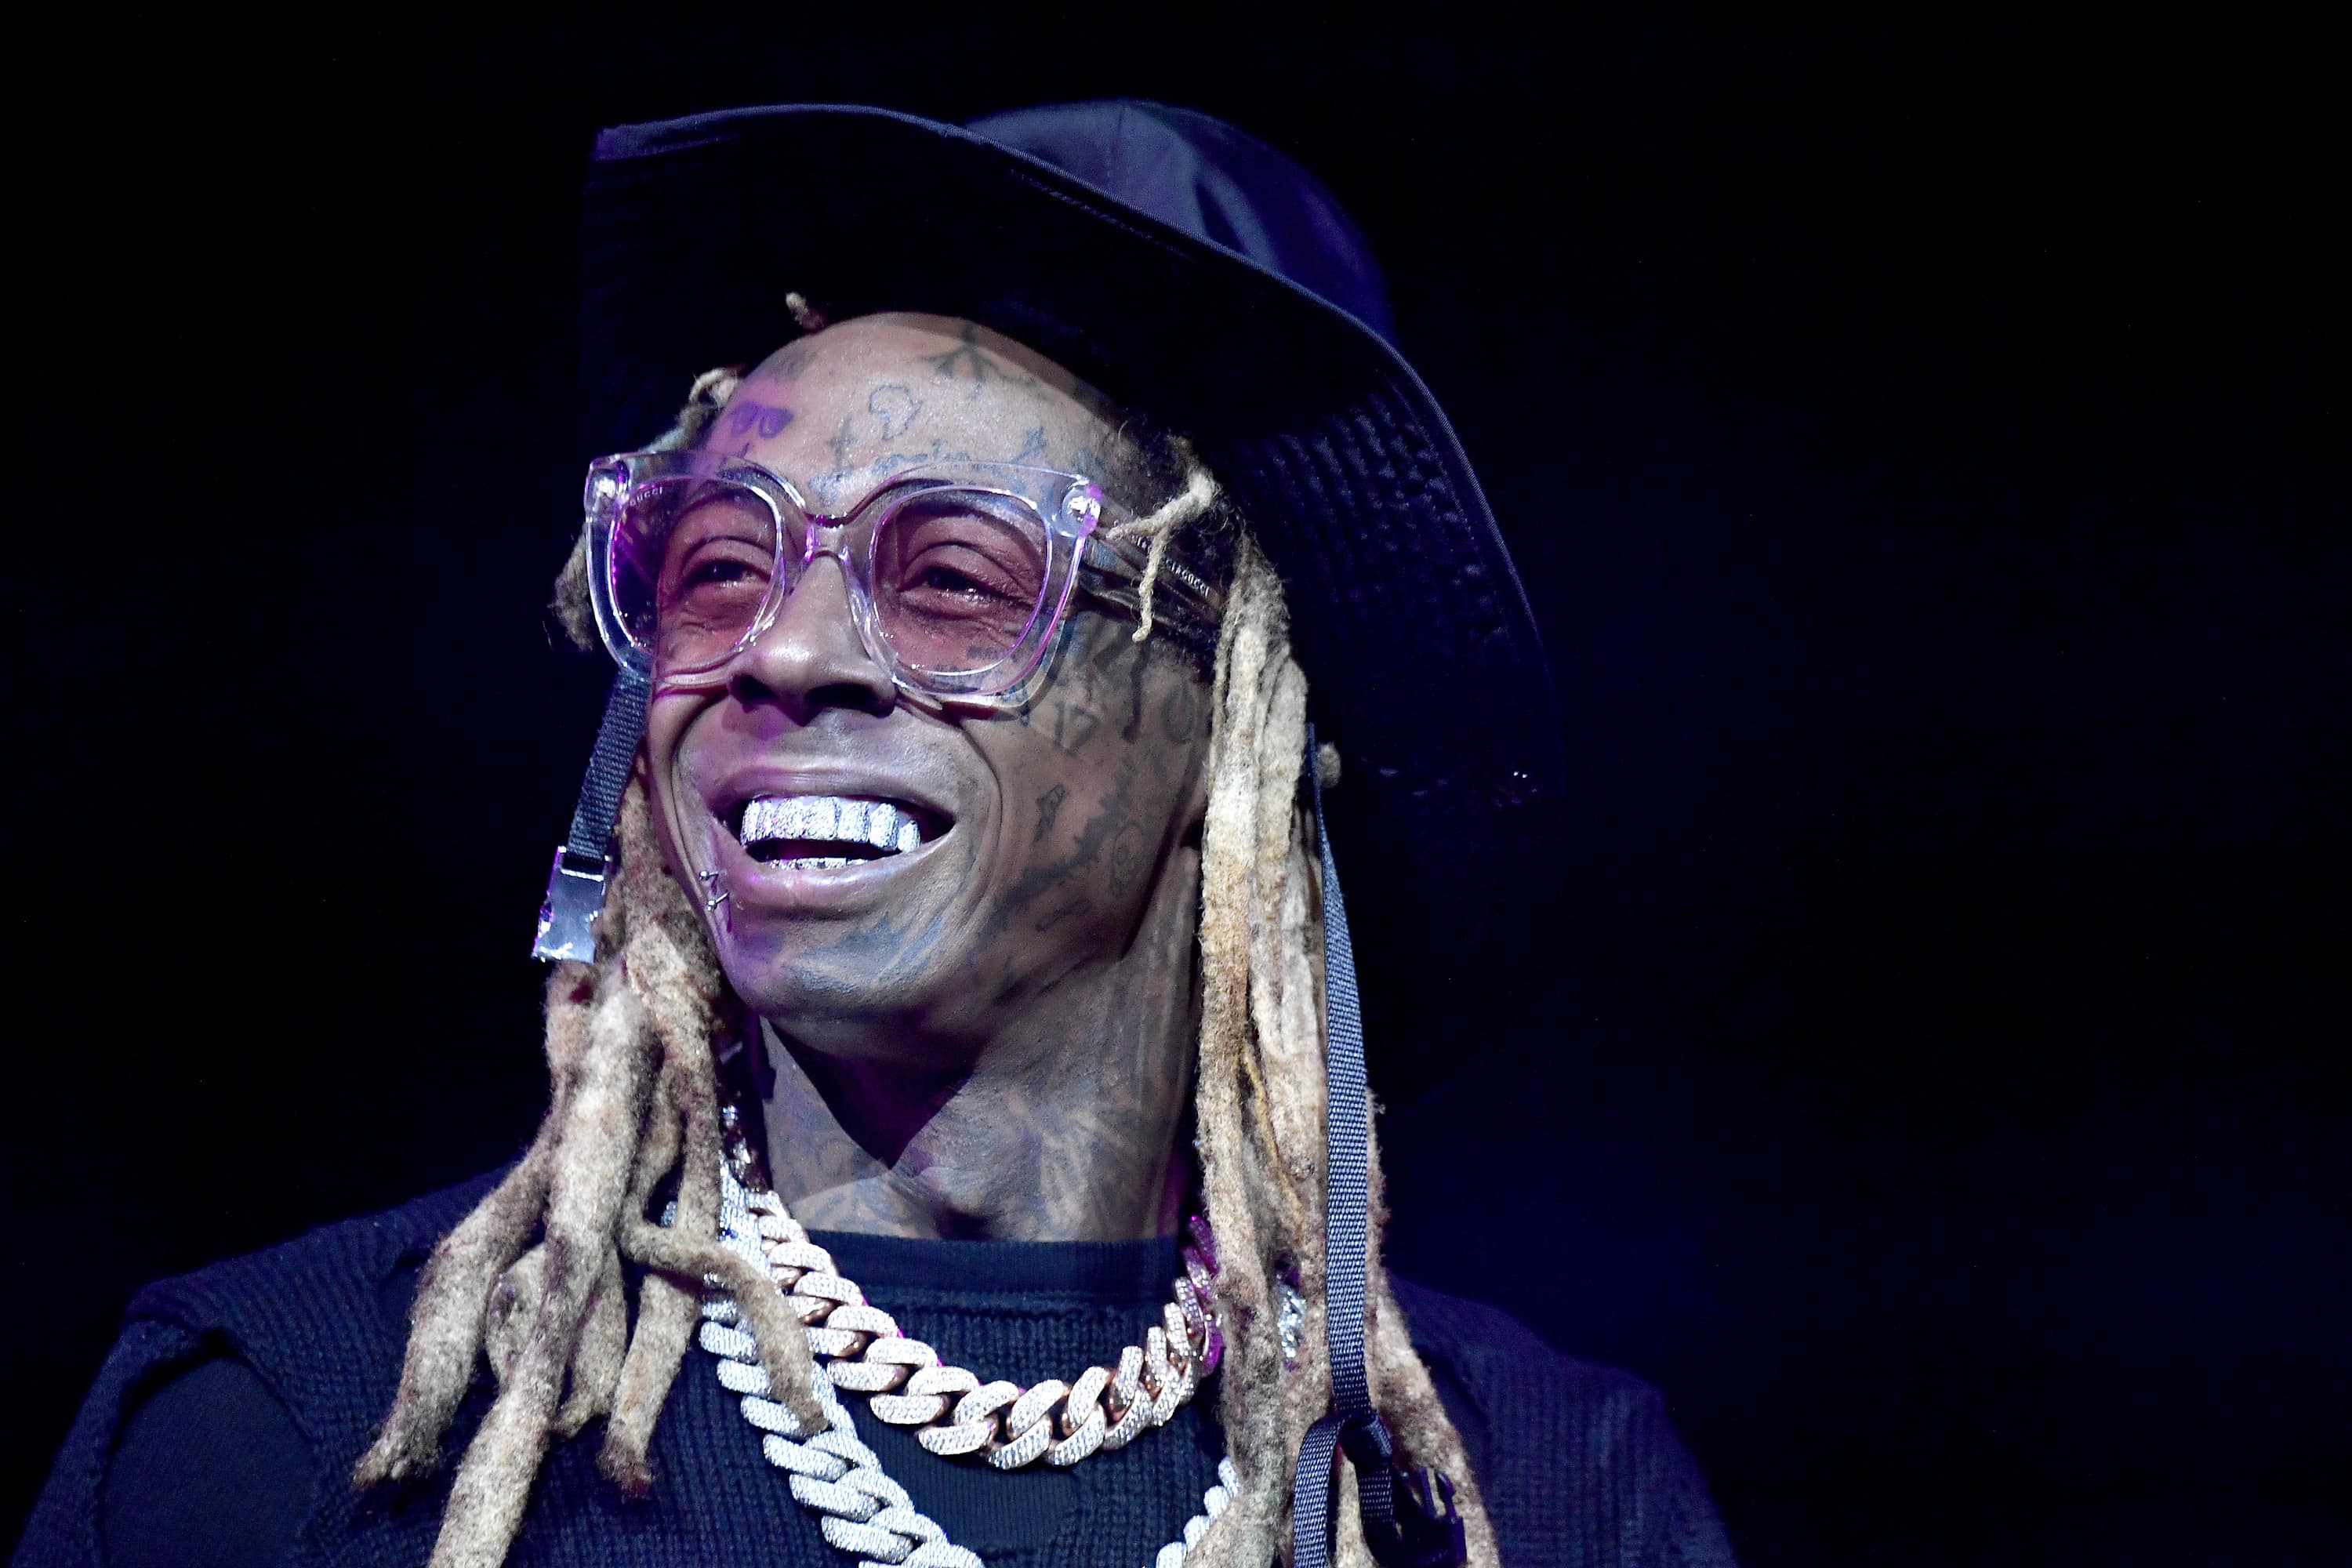 Lil Wayne hints that he may have recently got married after he tweeted that he was the "happiest man in the world."